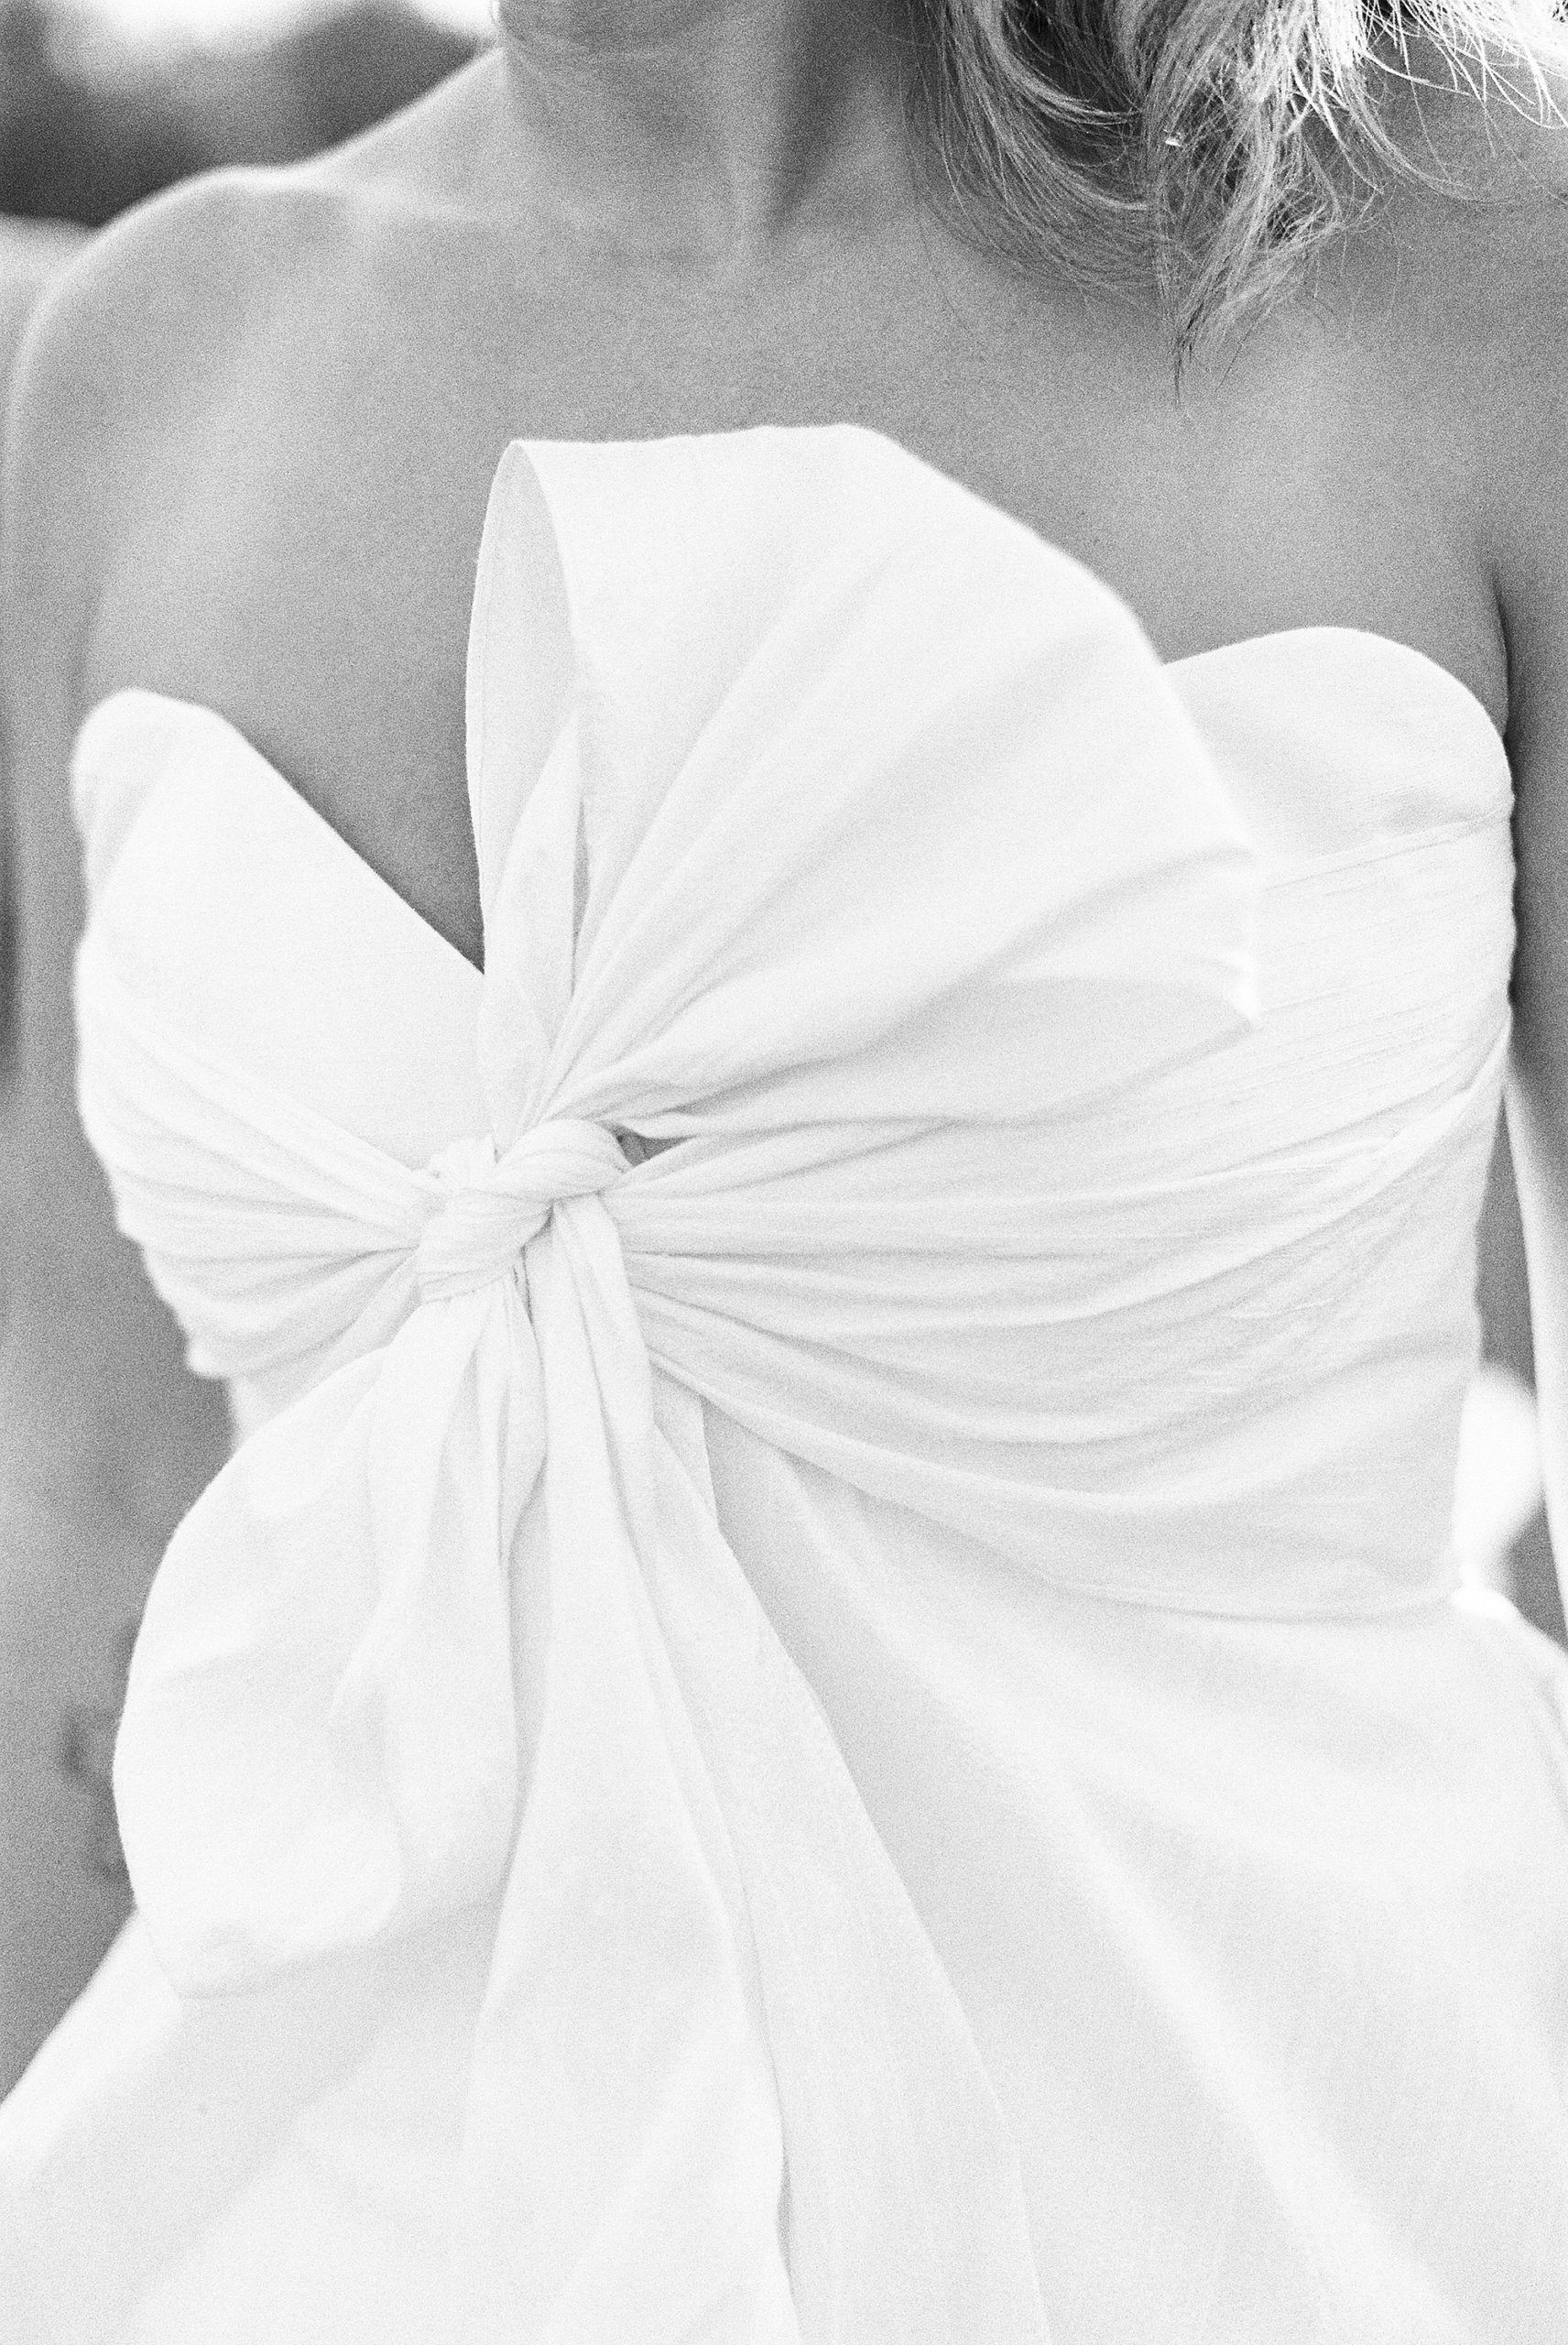 black and white wedding gown detail upstate NY wedding